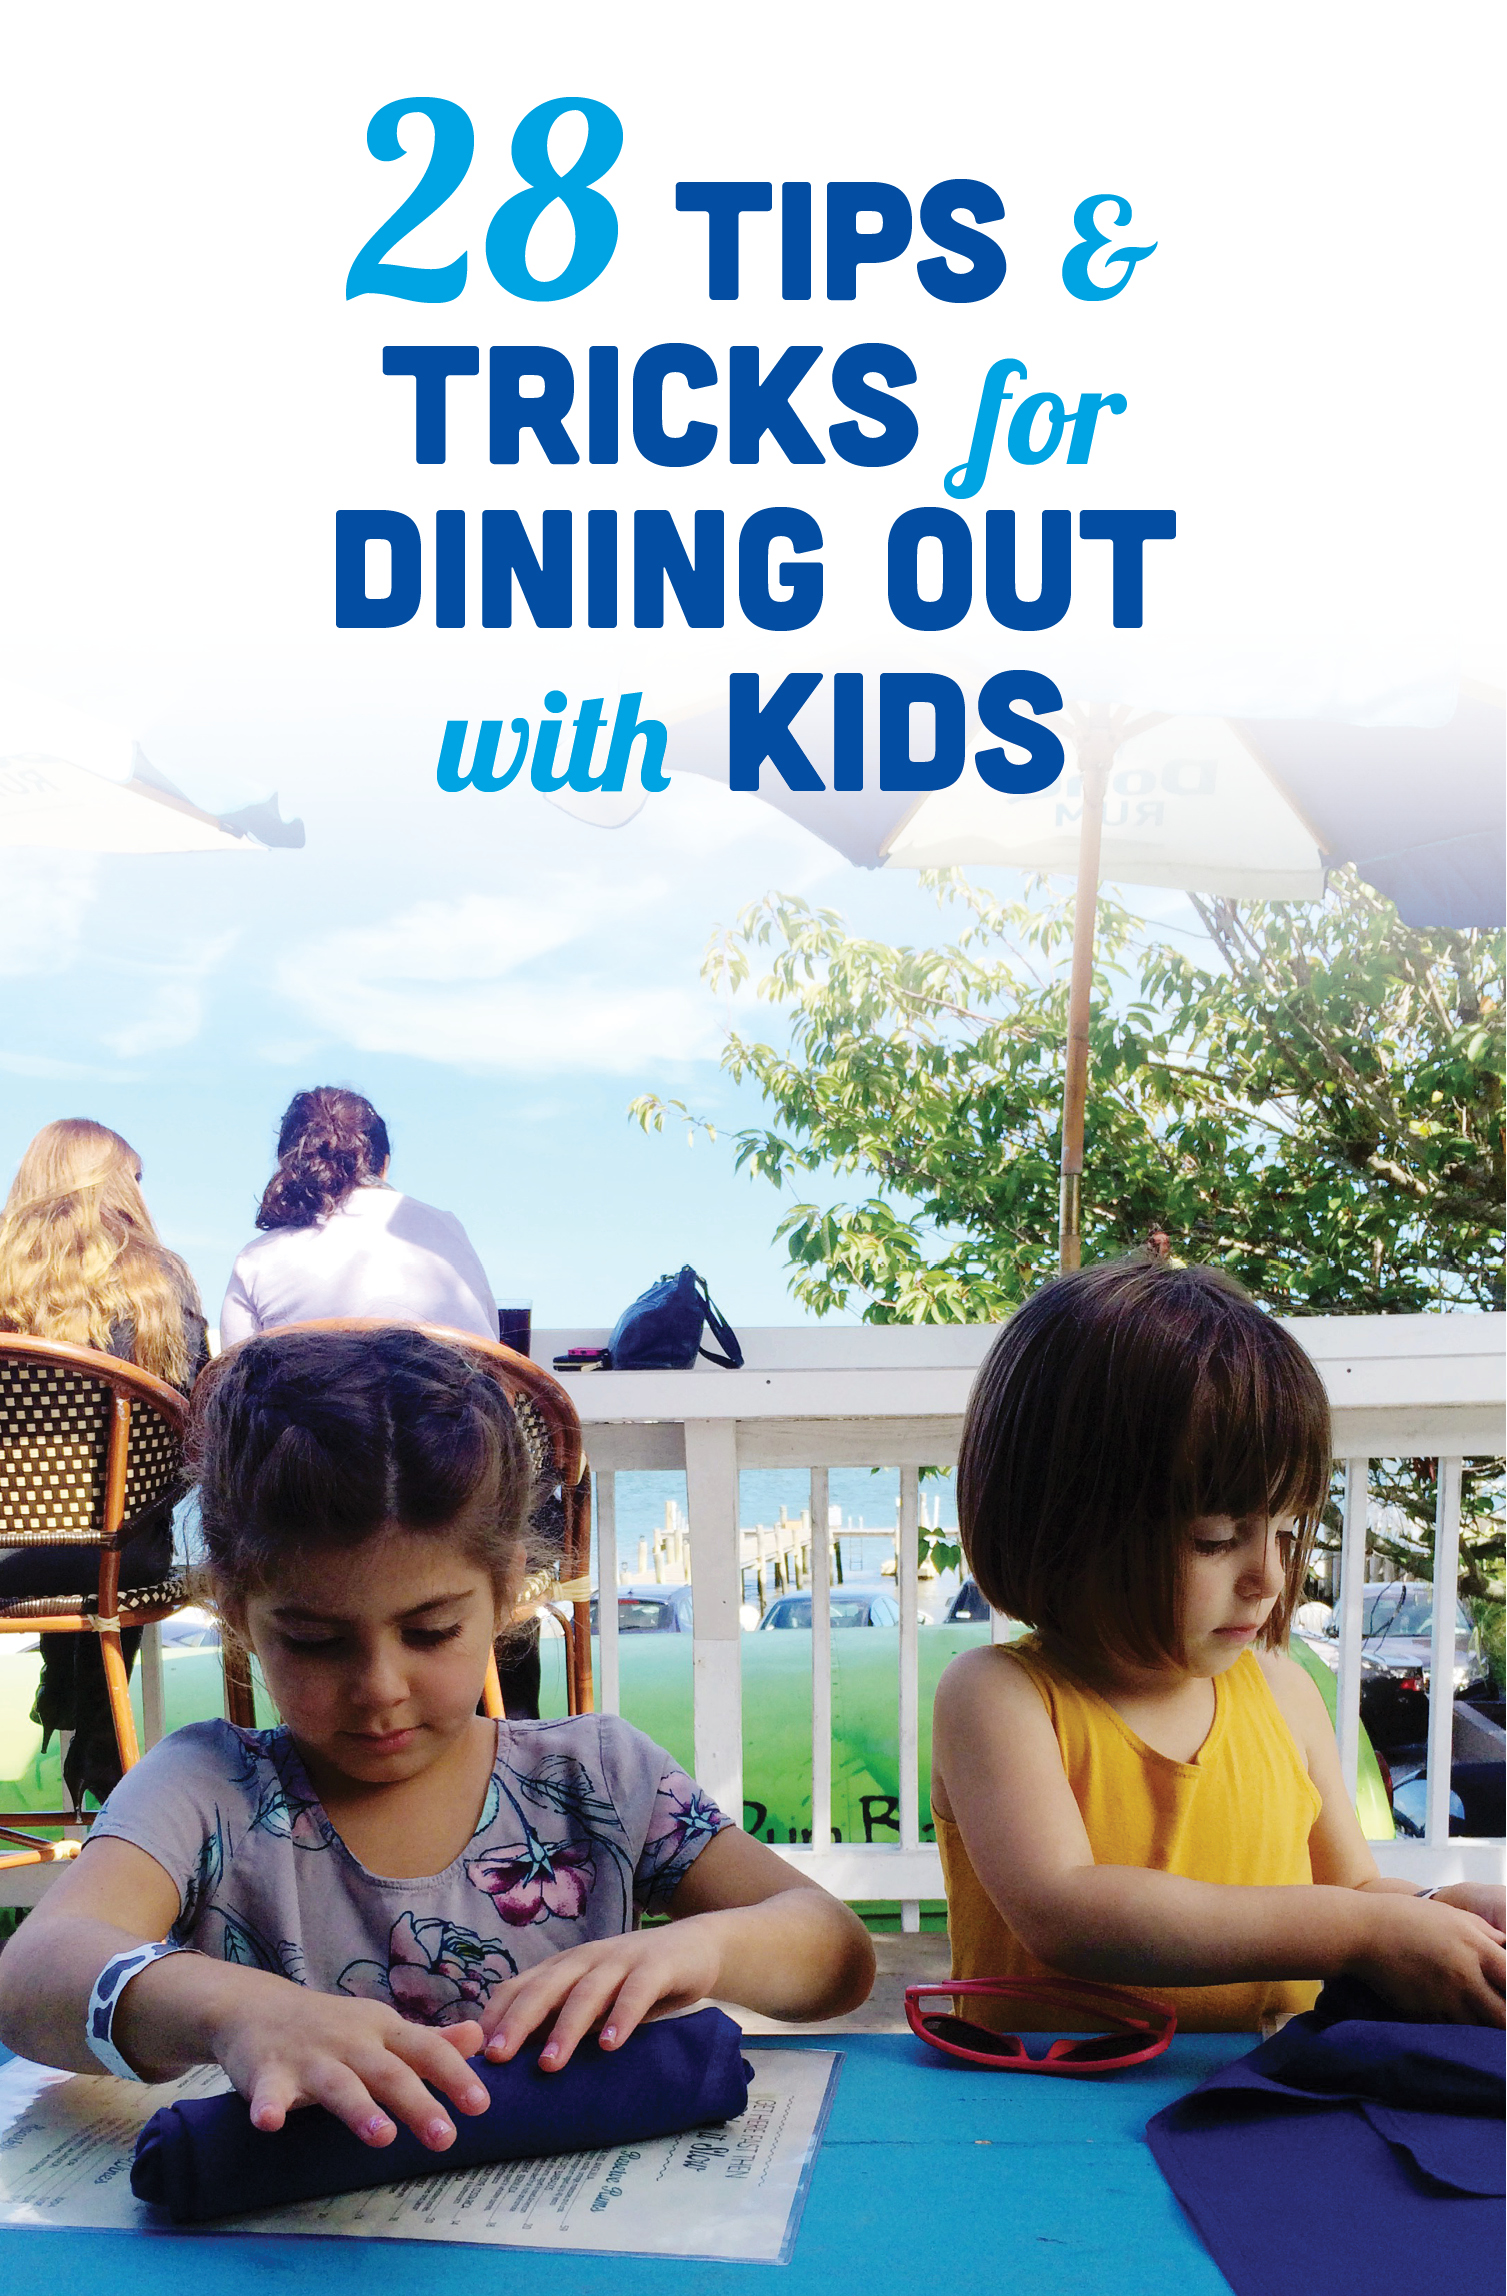 tips for dining out with kids